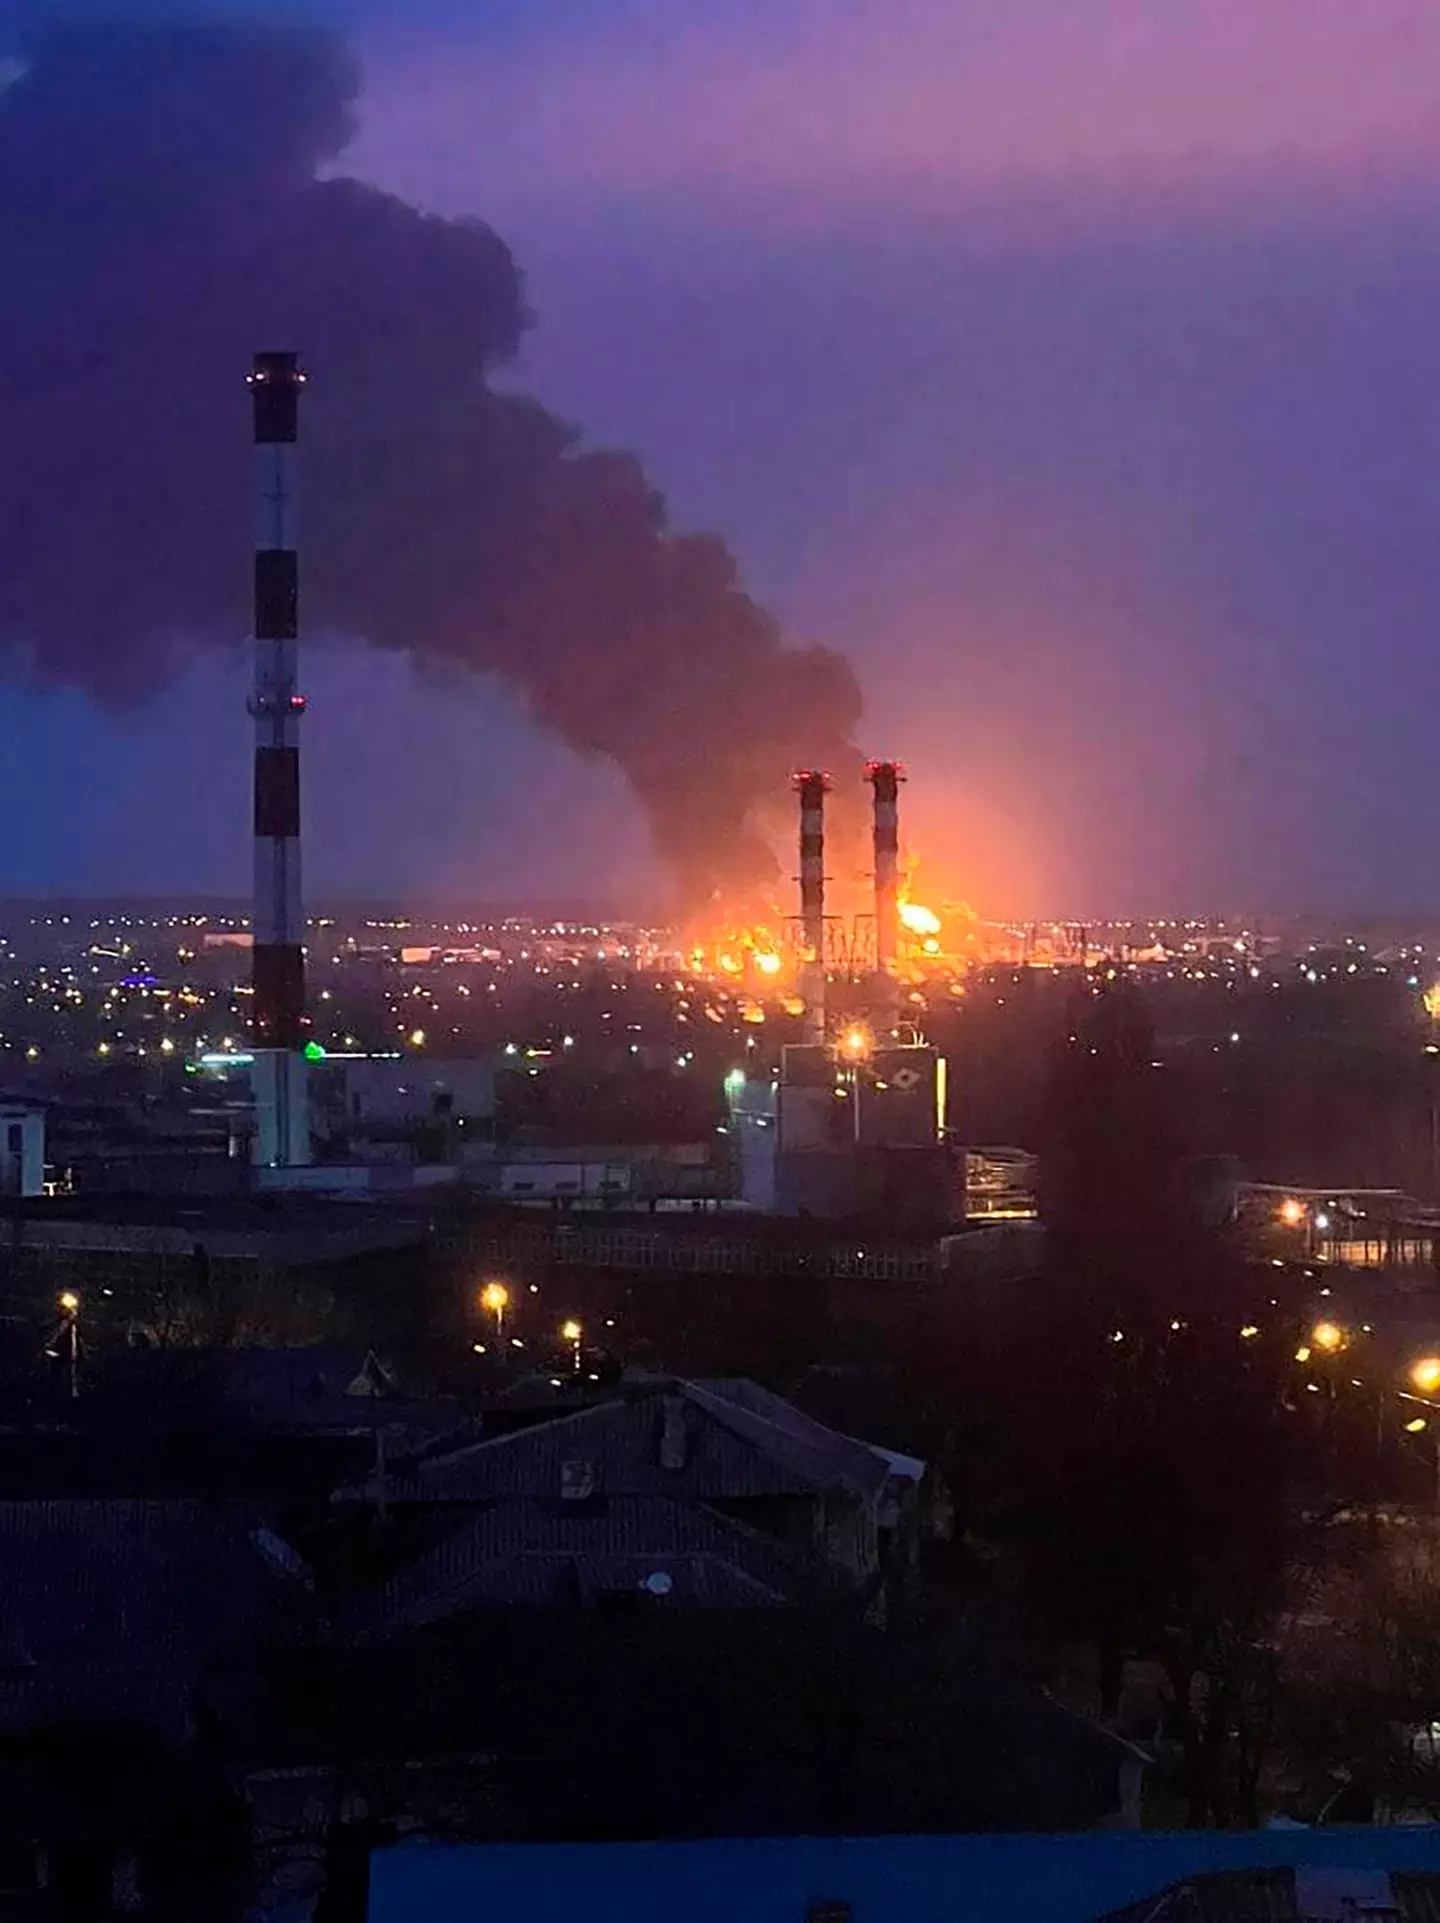 Ukraine has been accused of striking an oil facility in Russia.